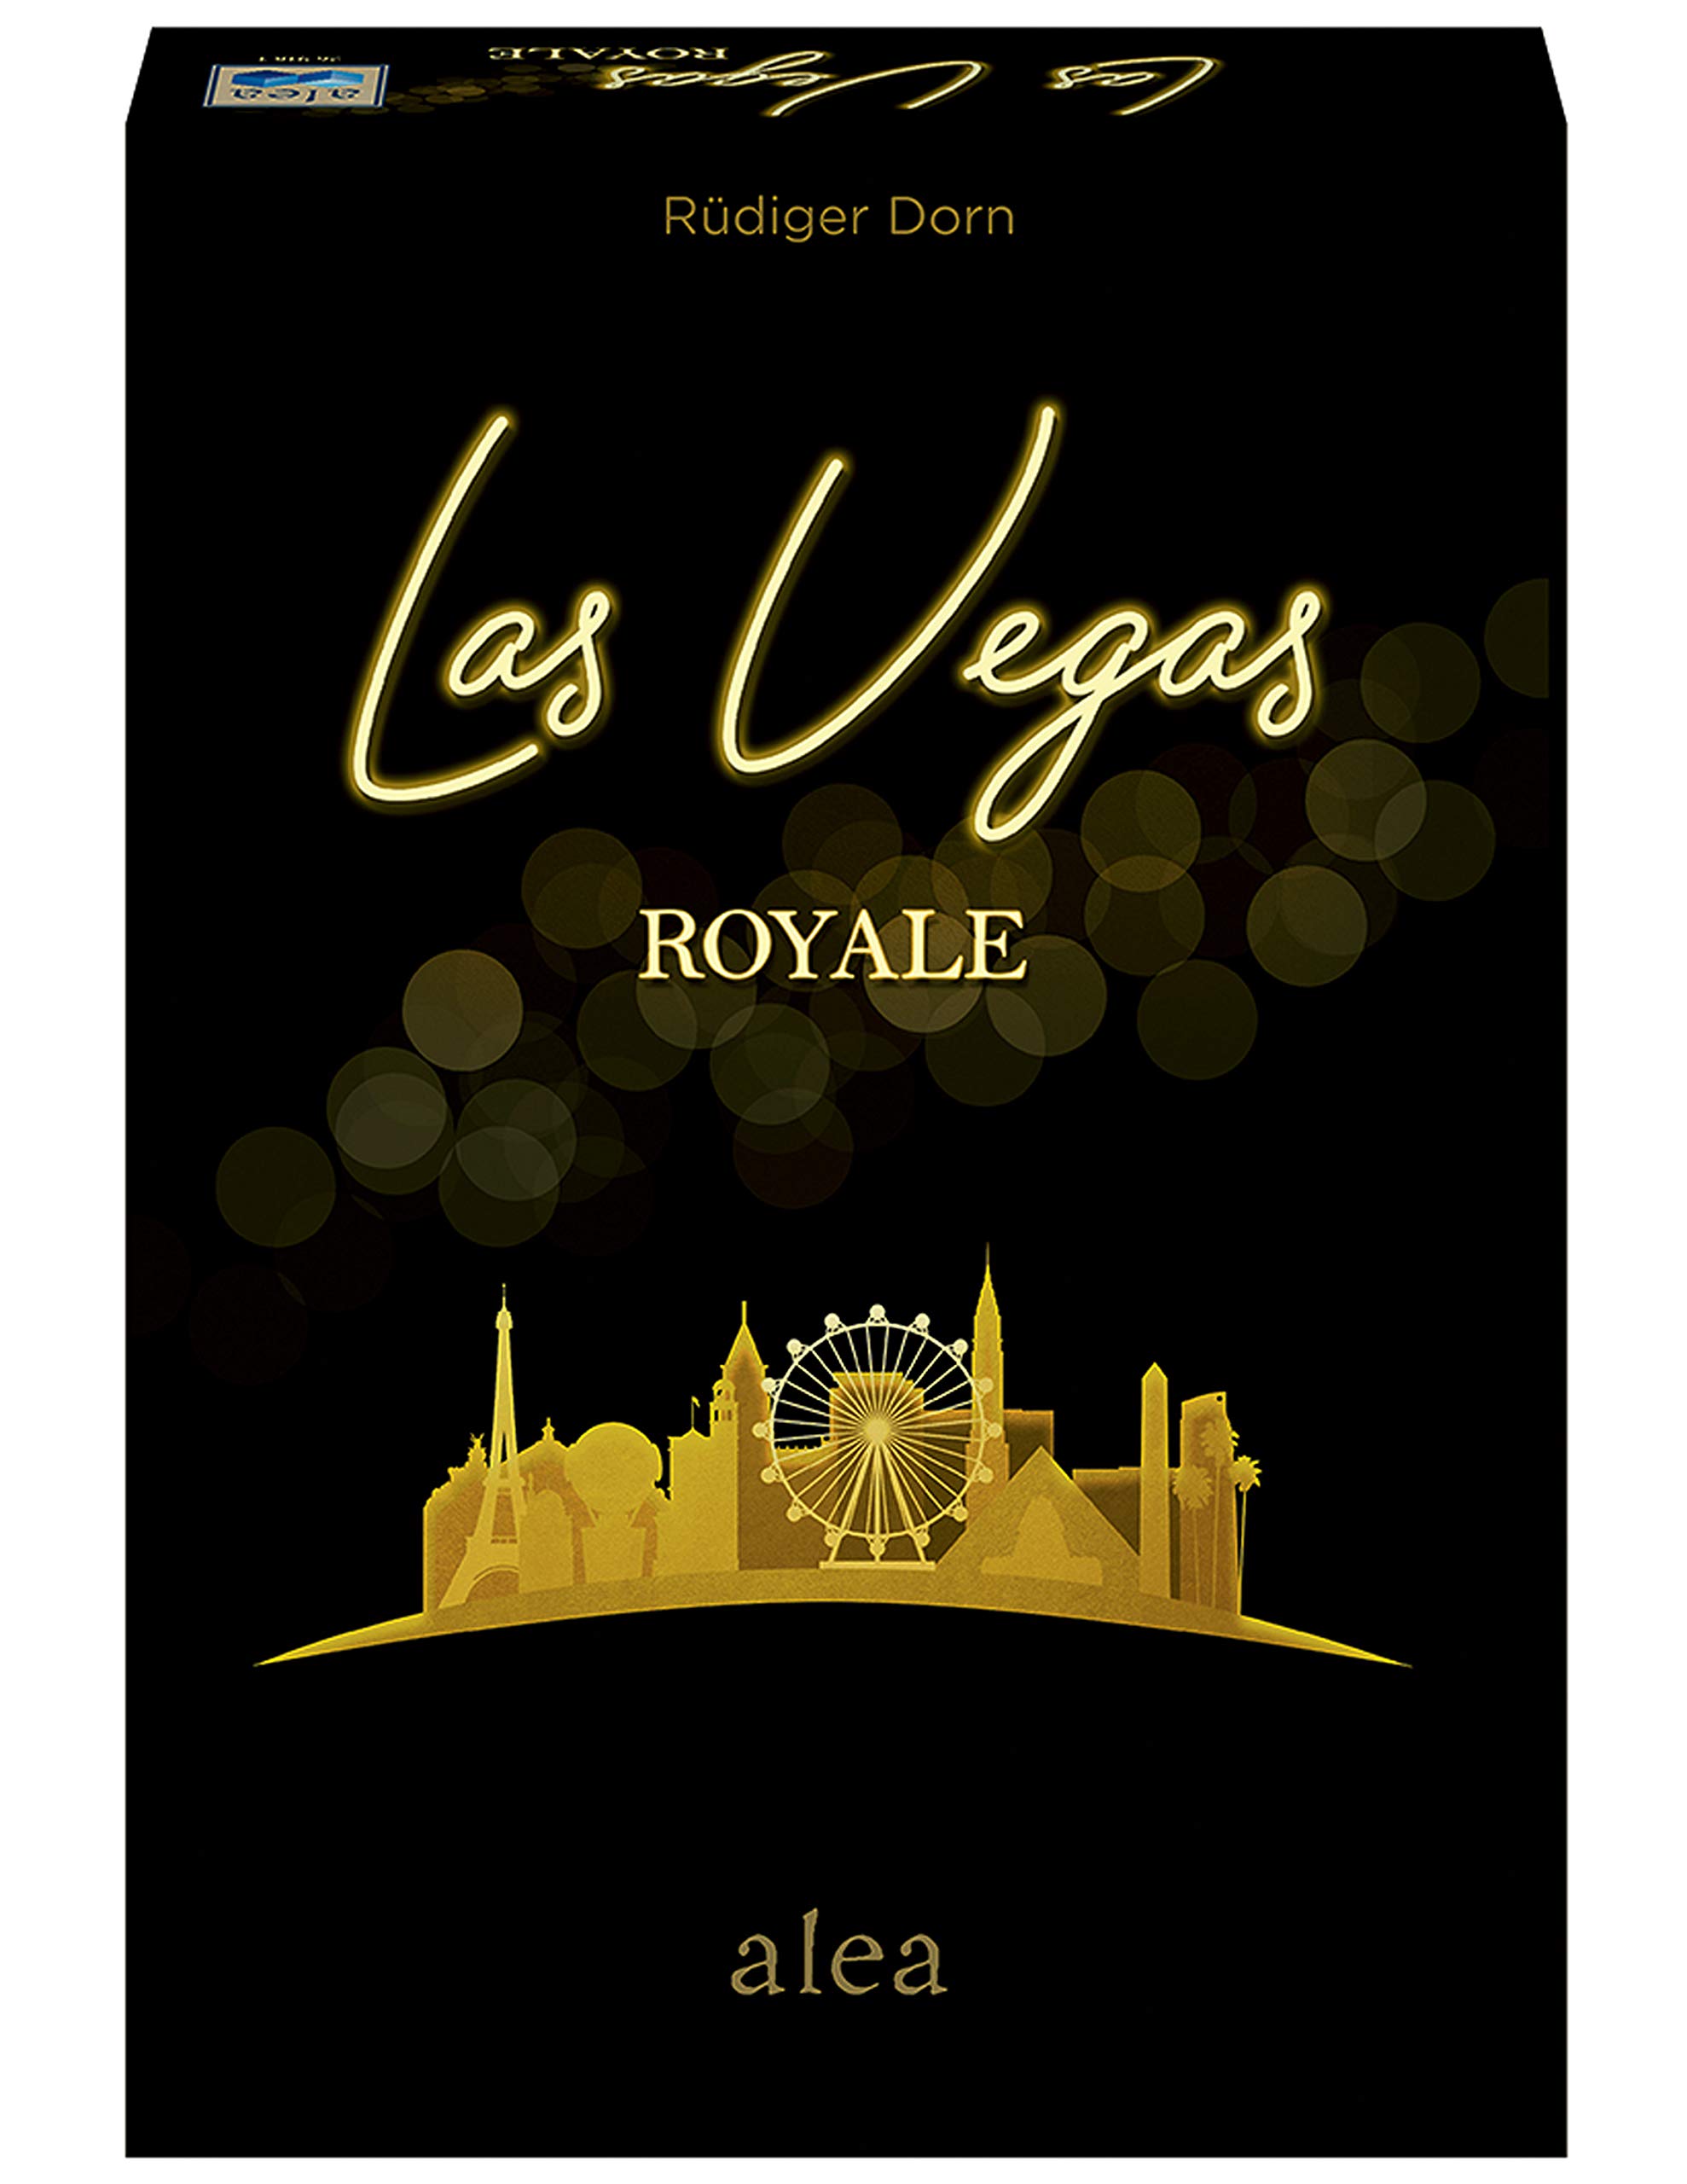 Ravensburger Las Vegas Royale Strategy Board Game for Ages 8 & Up - 20th Anniversary Edition Alea